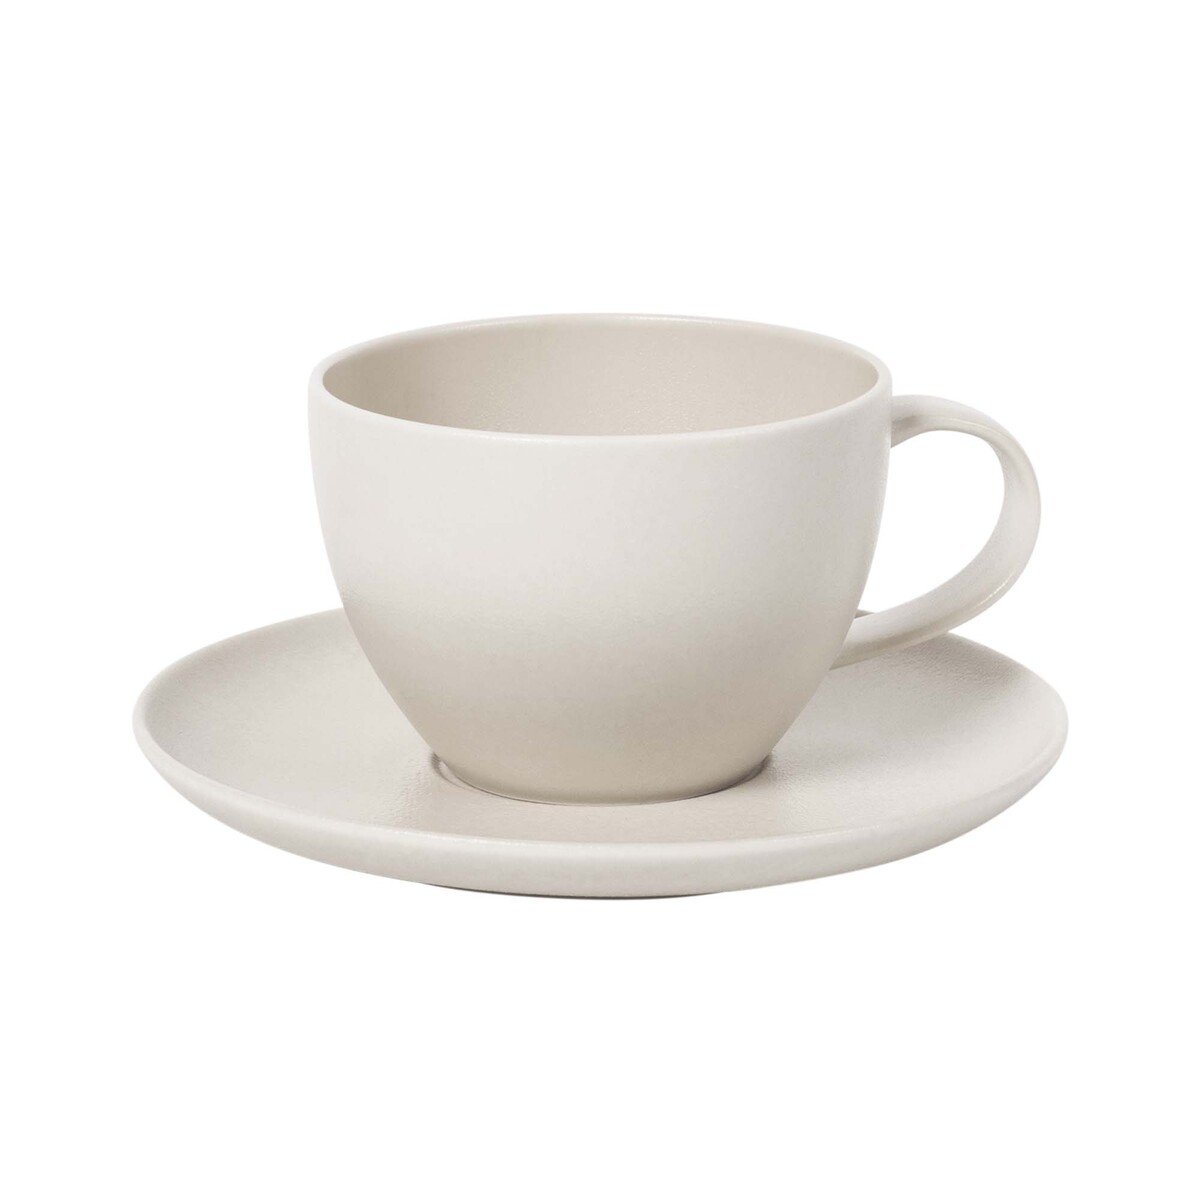 Qualitier Cup and Saucer, Grey, 200cc, 5611A